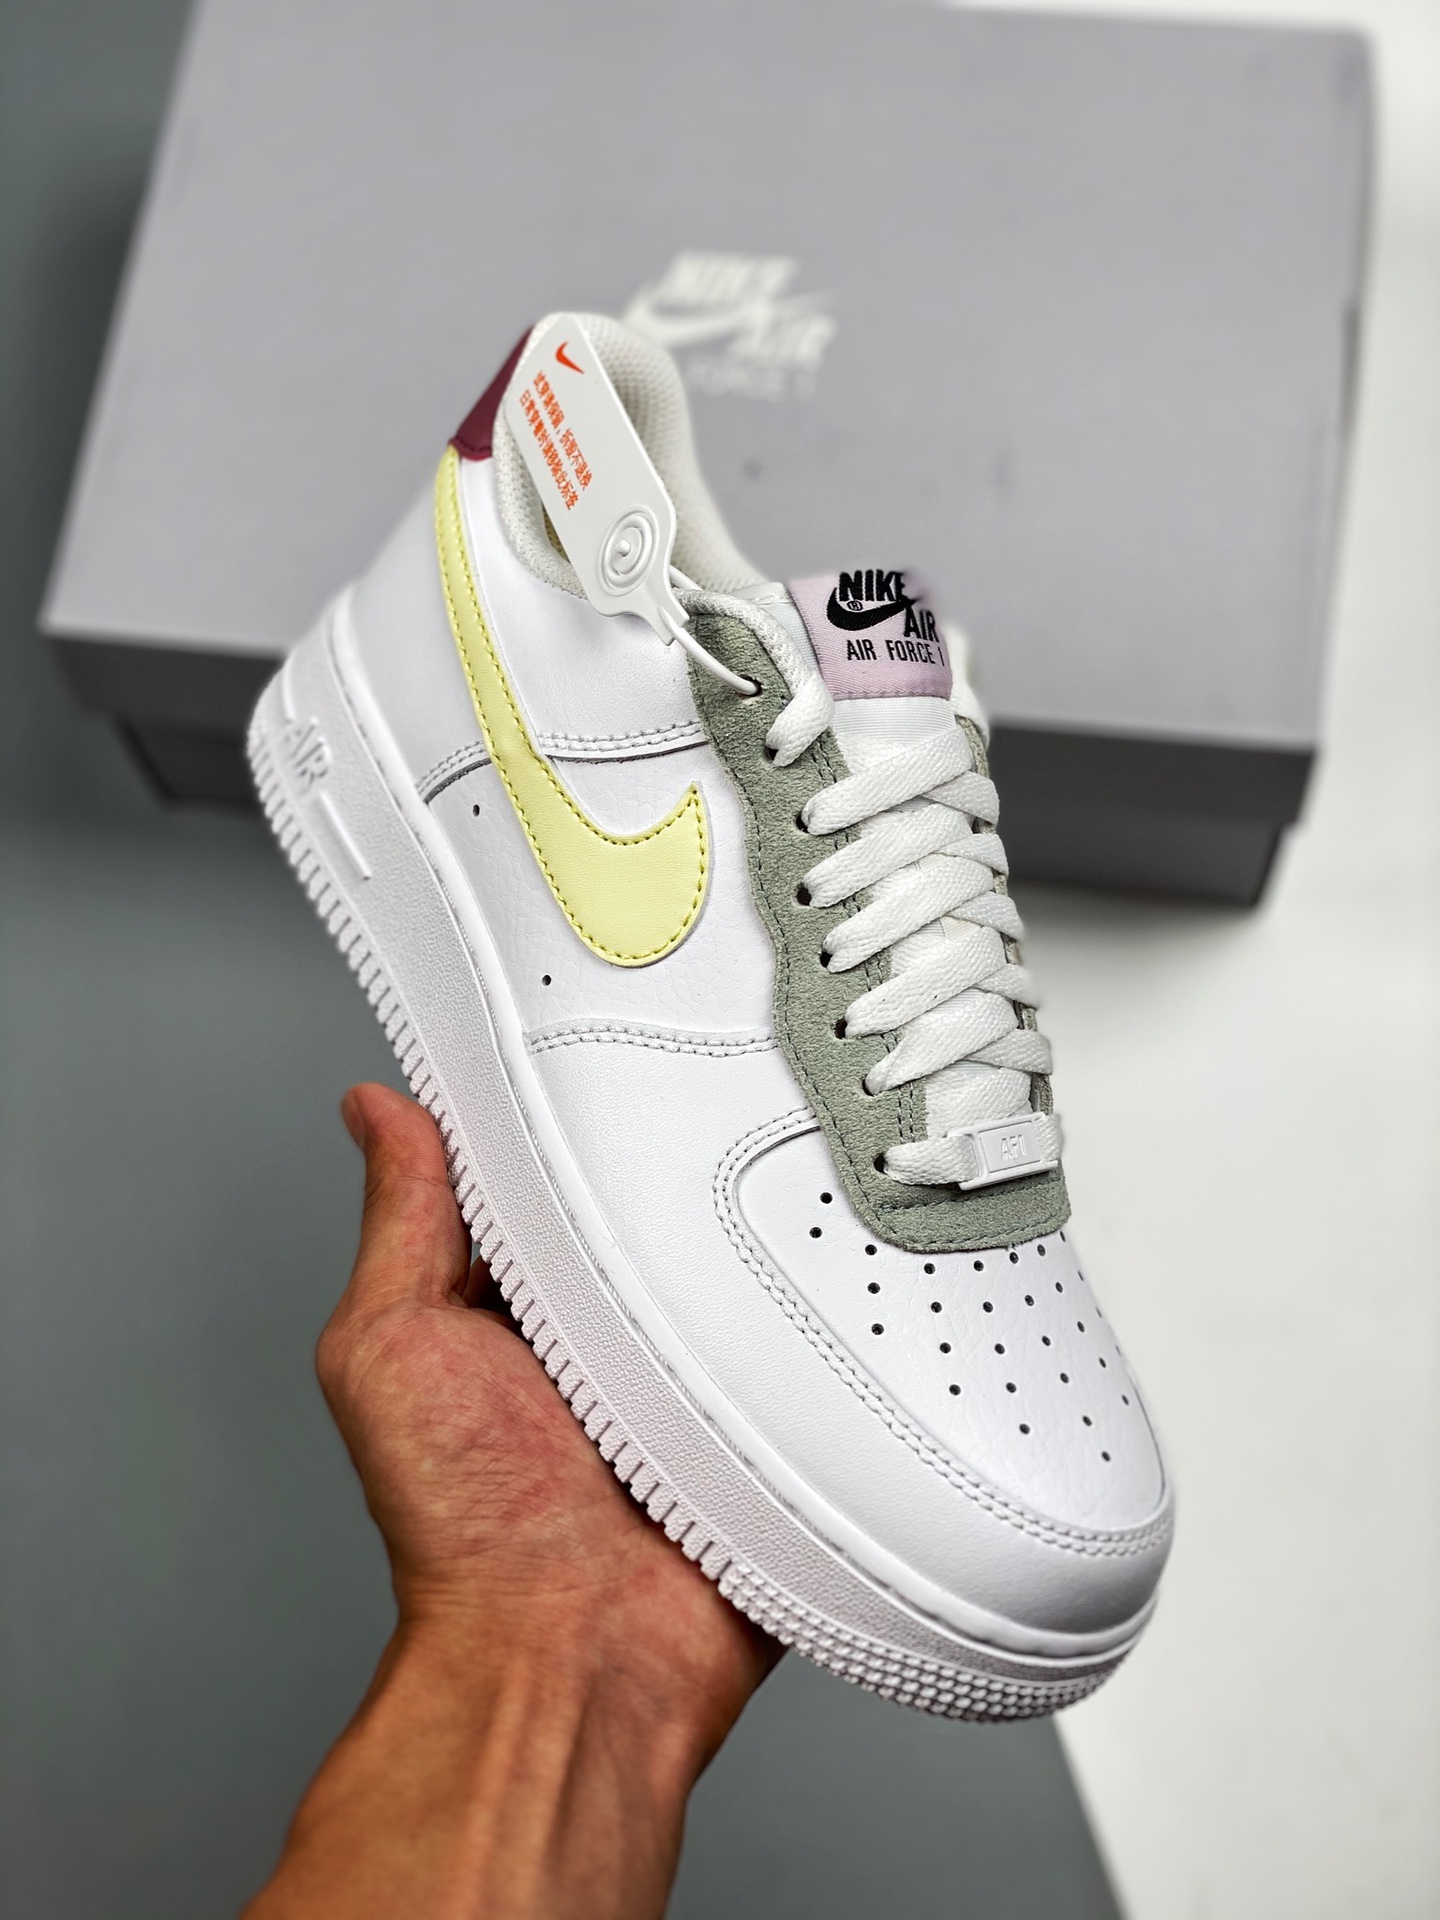 Nike Air AF Force 1 Low White Pink DN4930-100 Shoes